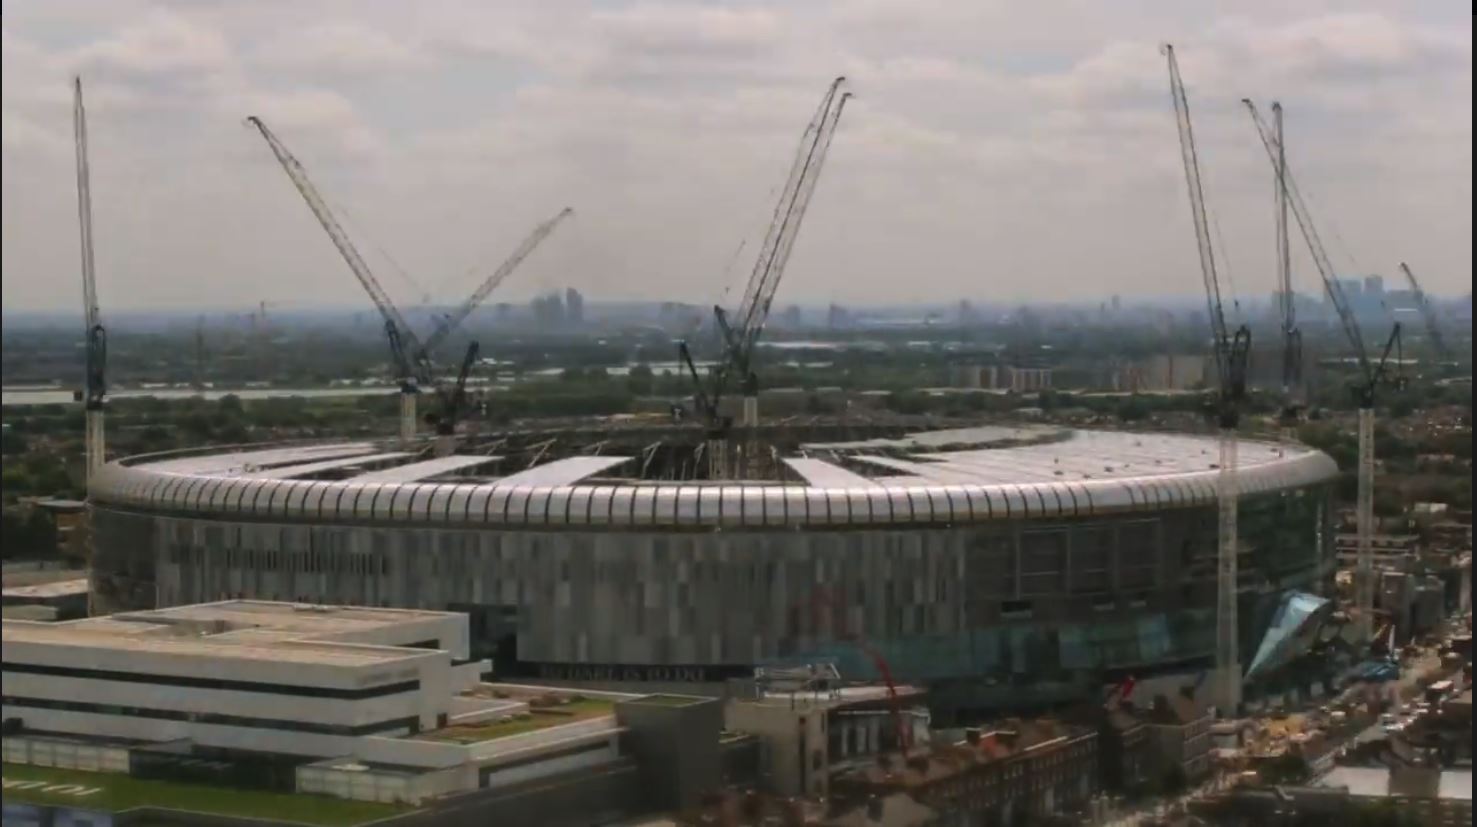 The Tottenham Hotspur Stadium is almost due for completion - image June 2018